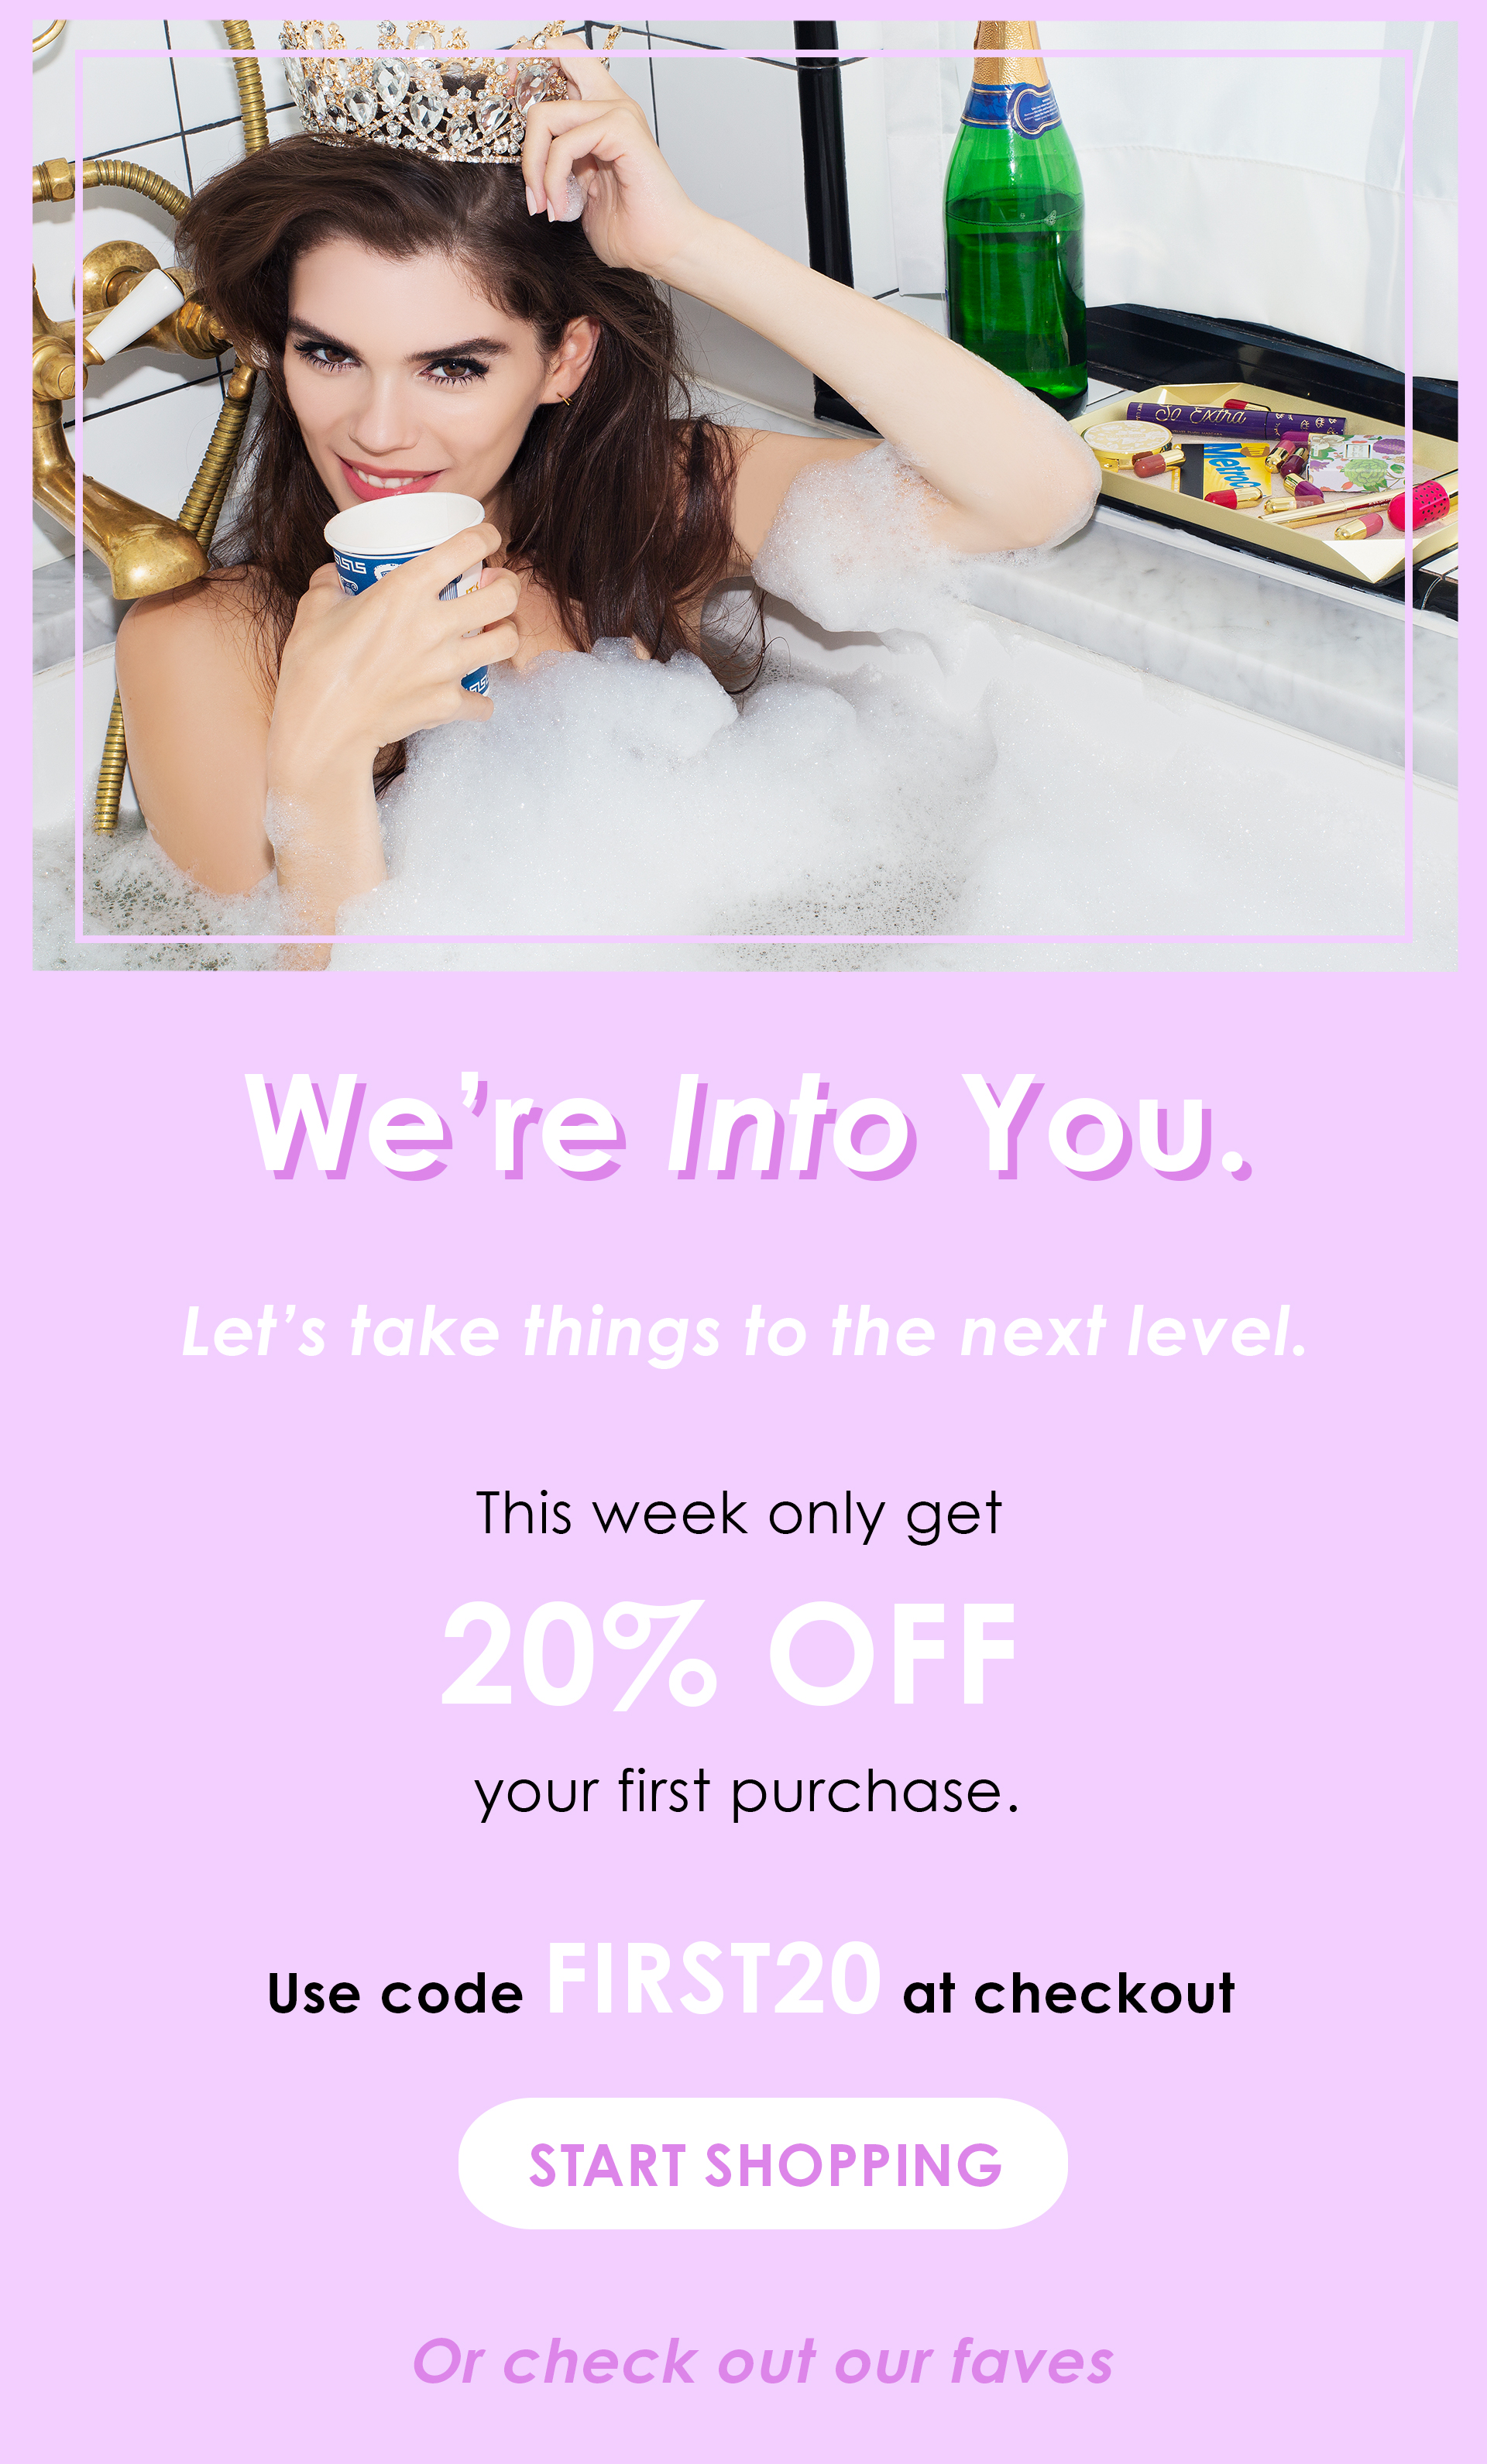 Get 20% Off Your First Purchase With Code FIRST20!